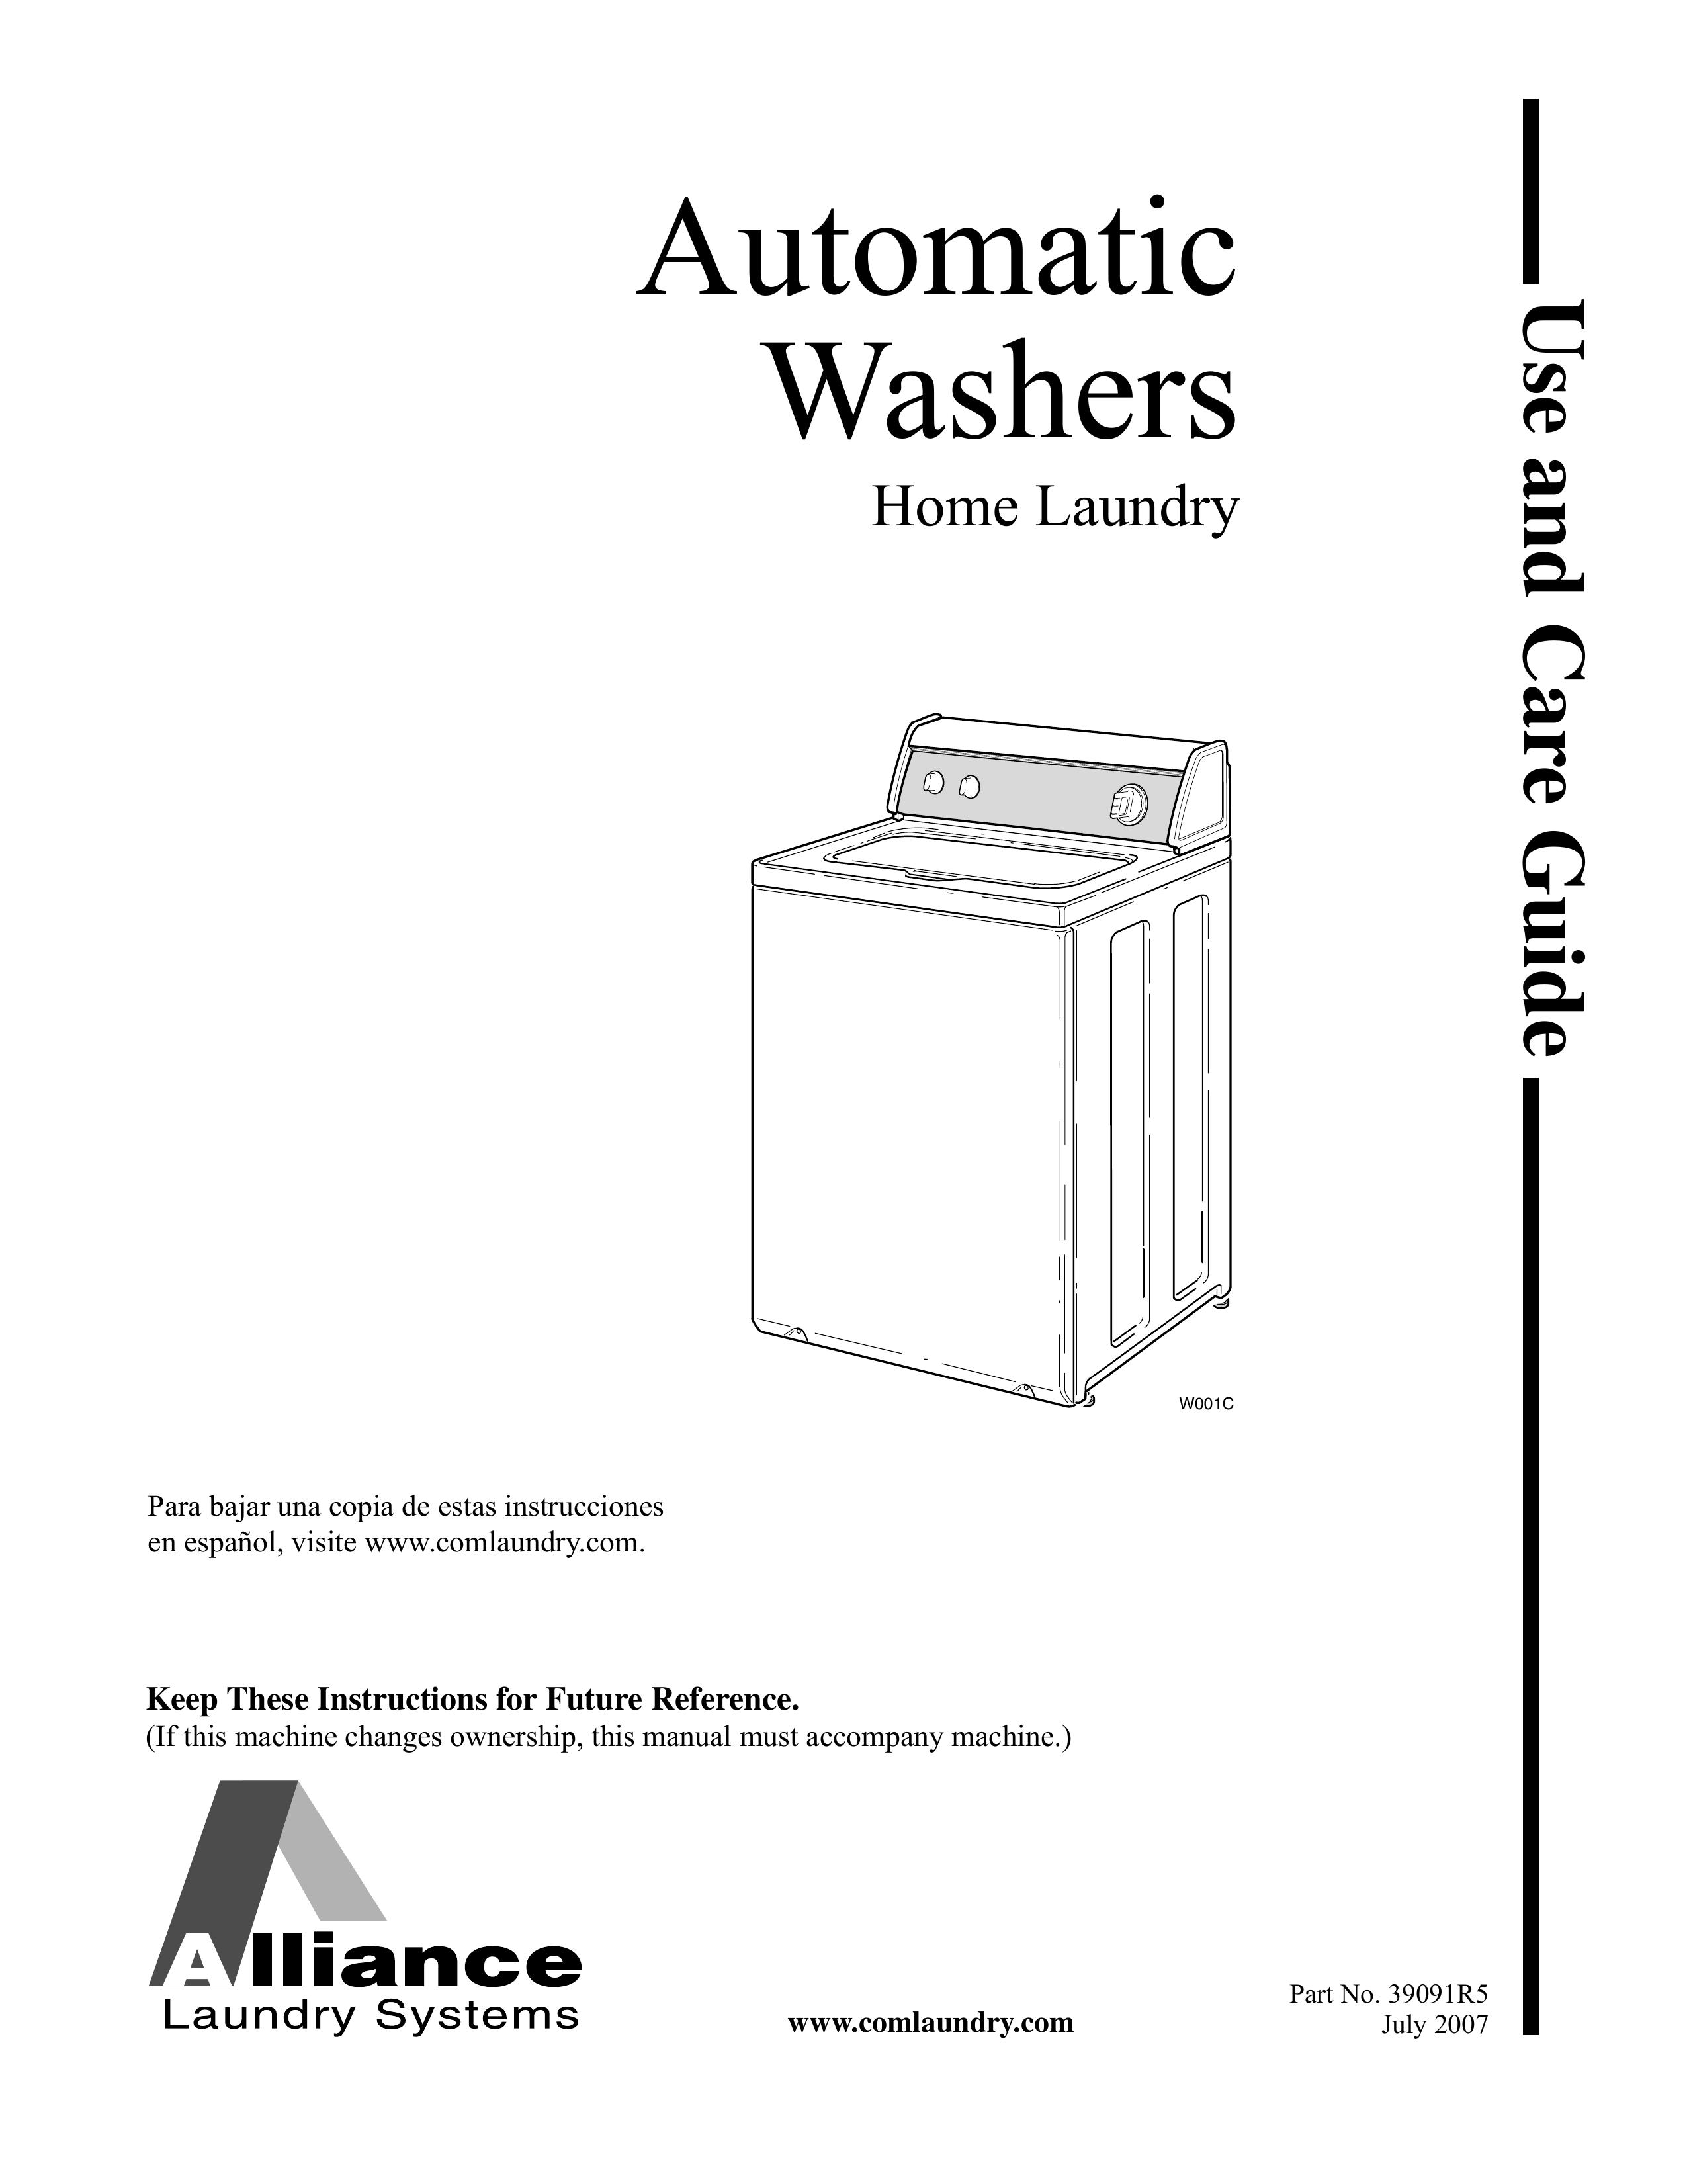 Alliance Laundry Systems LWS01M Washer/Dryer User Manual